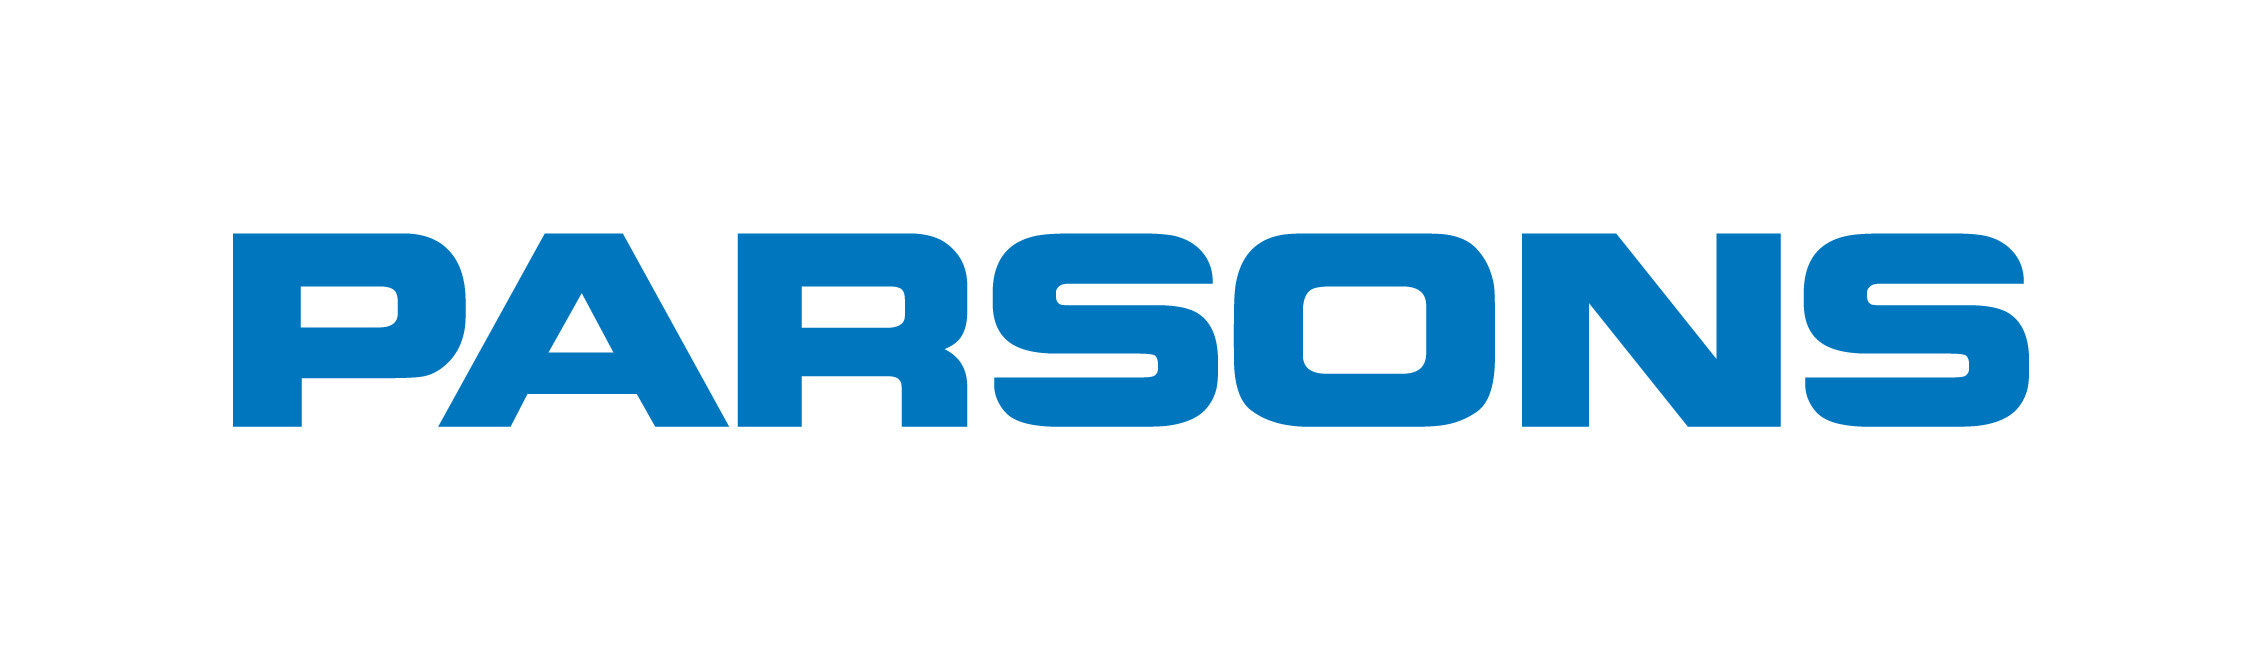 Parsons Corporation Files Registration Statement for Proposed Initial Public Offering